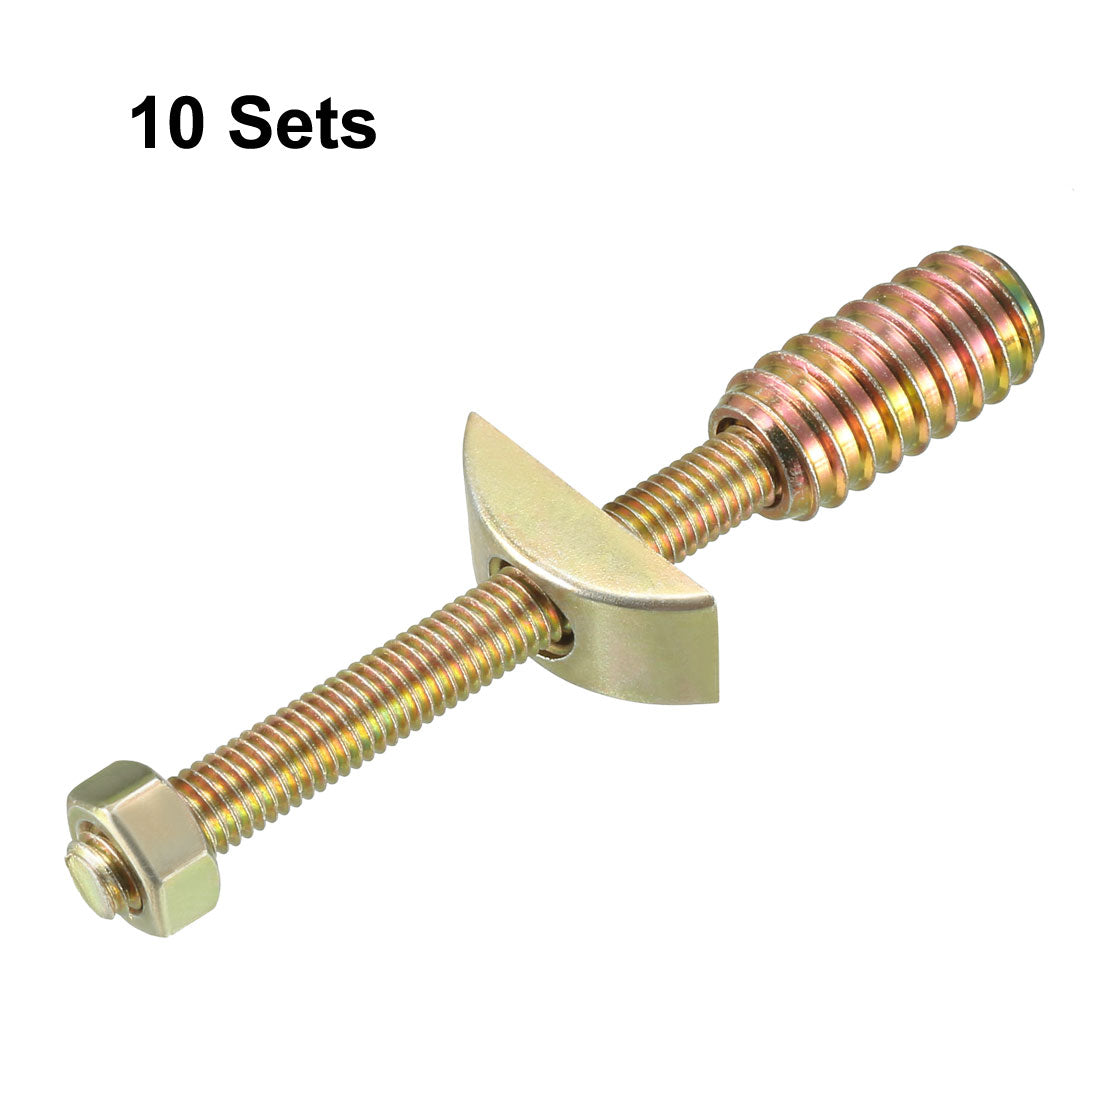 uxcell Uxcell 10 Sets Furniture Hardware Zinc Plated Half-Moon Nut Connecting Fitting Bronze Tone